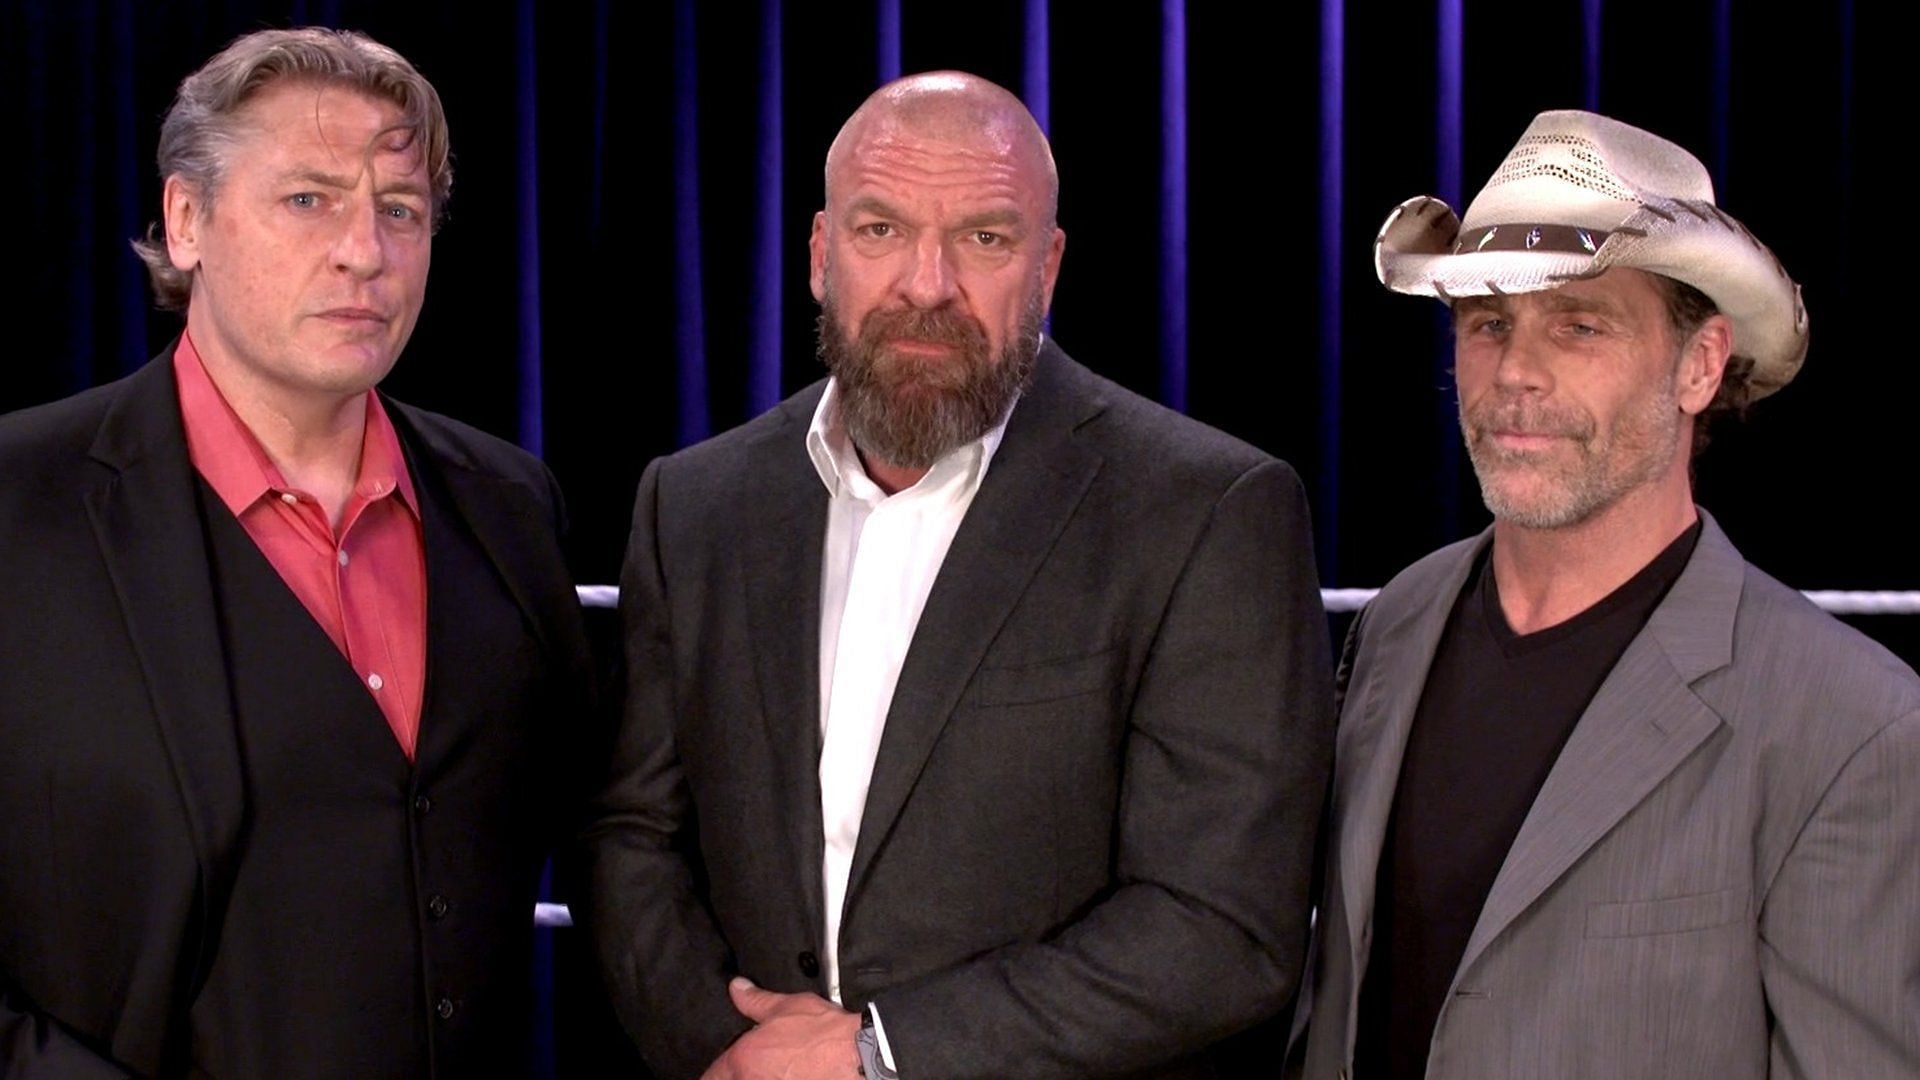 William Regal, Triple H, and Shawn Michaels